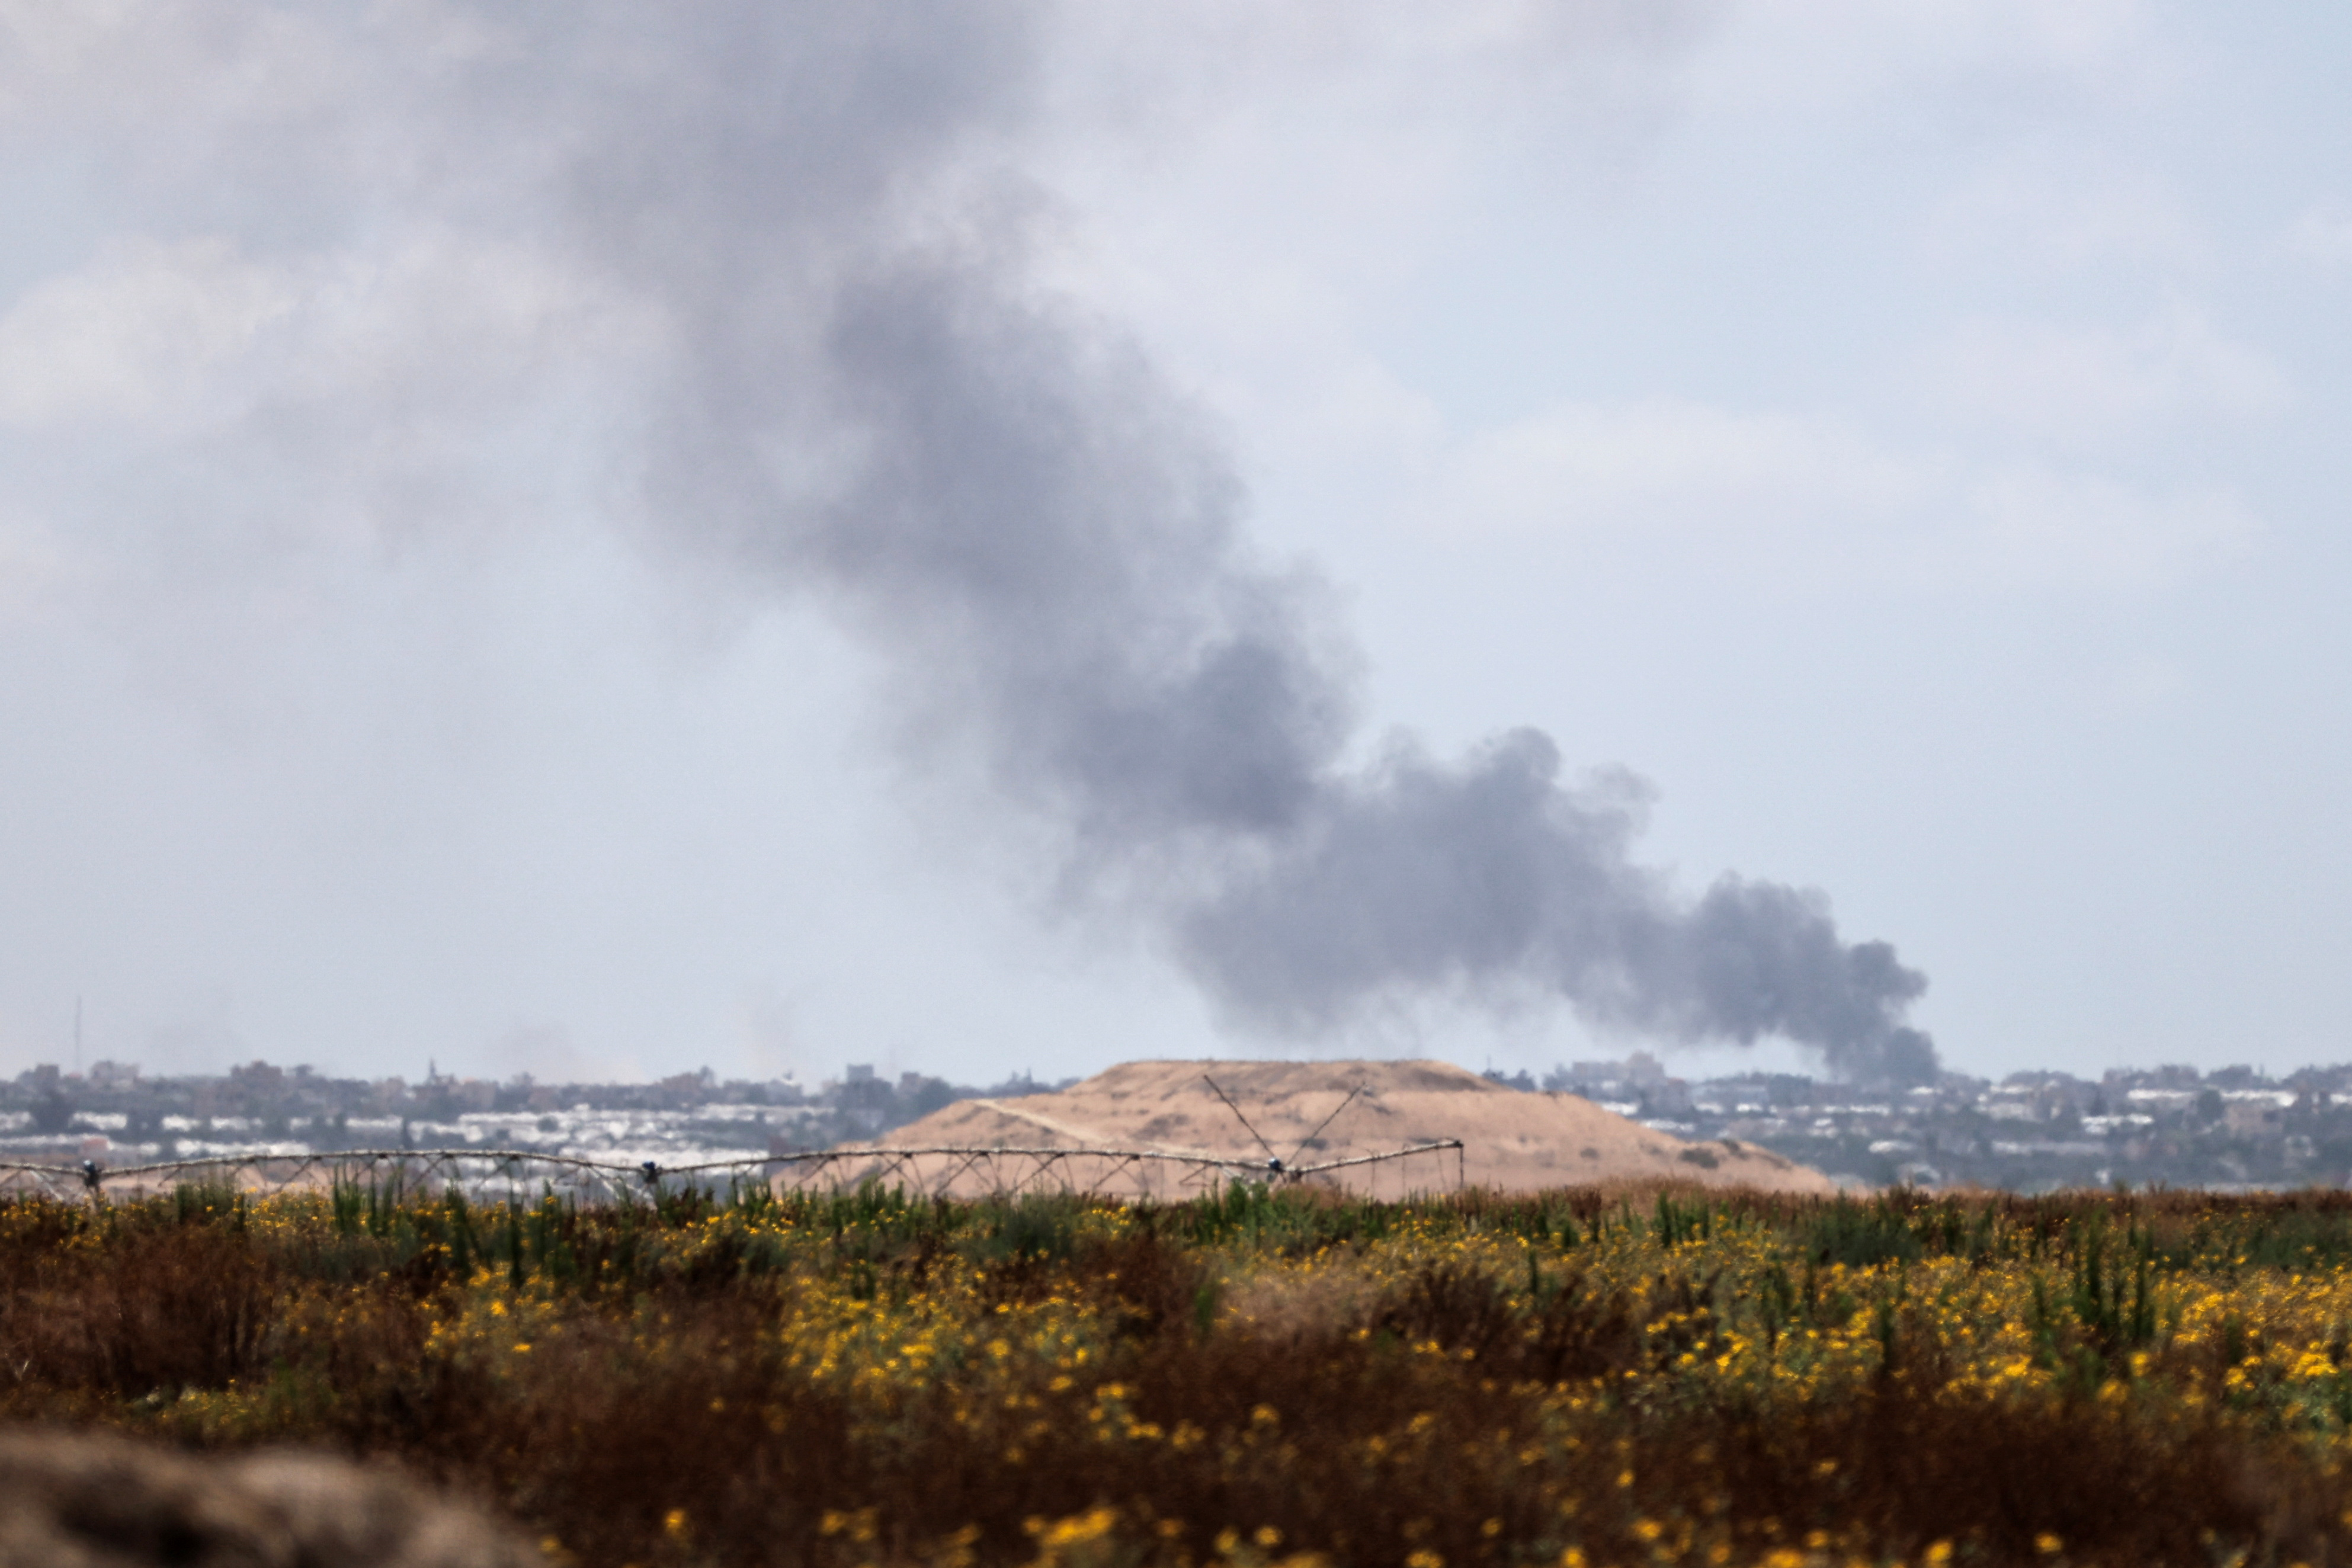 Smoke rises following an airstrike in Gaza, amid the ongoing conflict between Israel and the Palestinian Islamist group Hamas, near the Israel-Gaza border, as seen from Israel